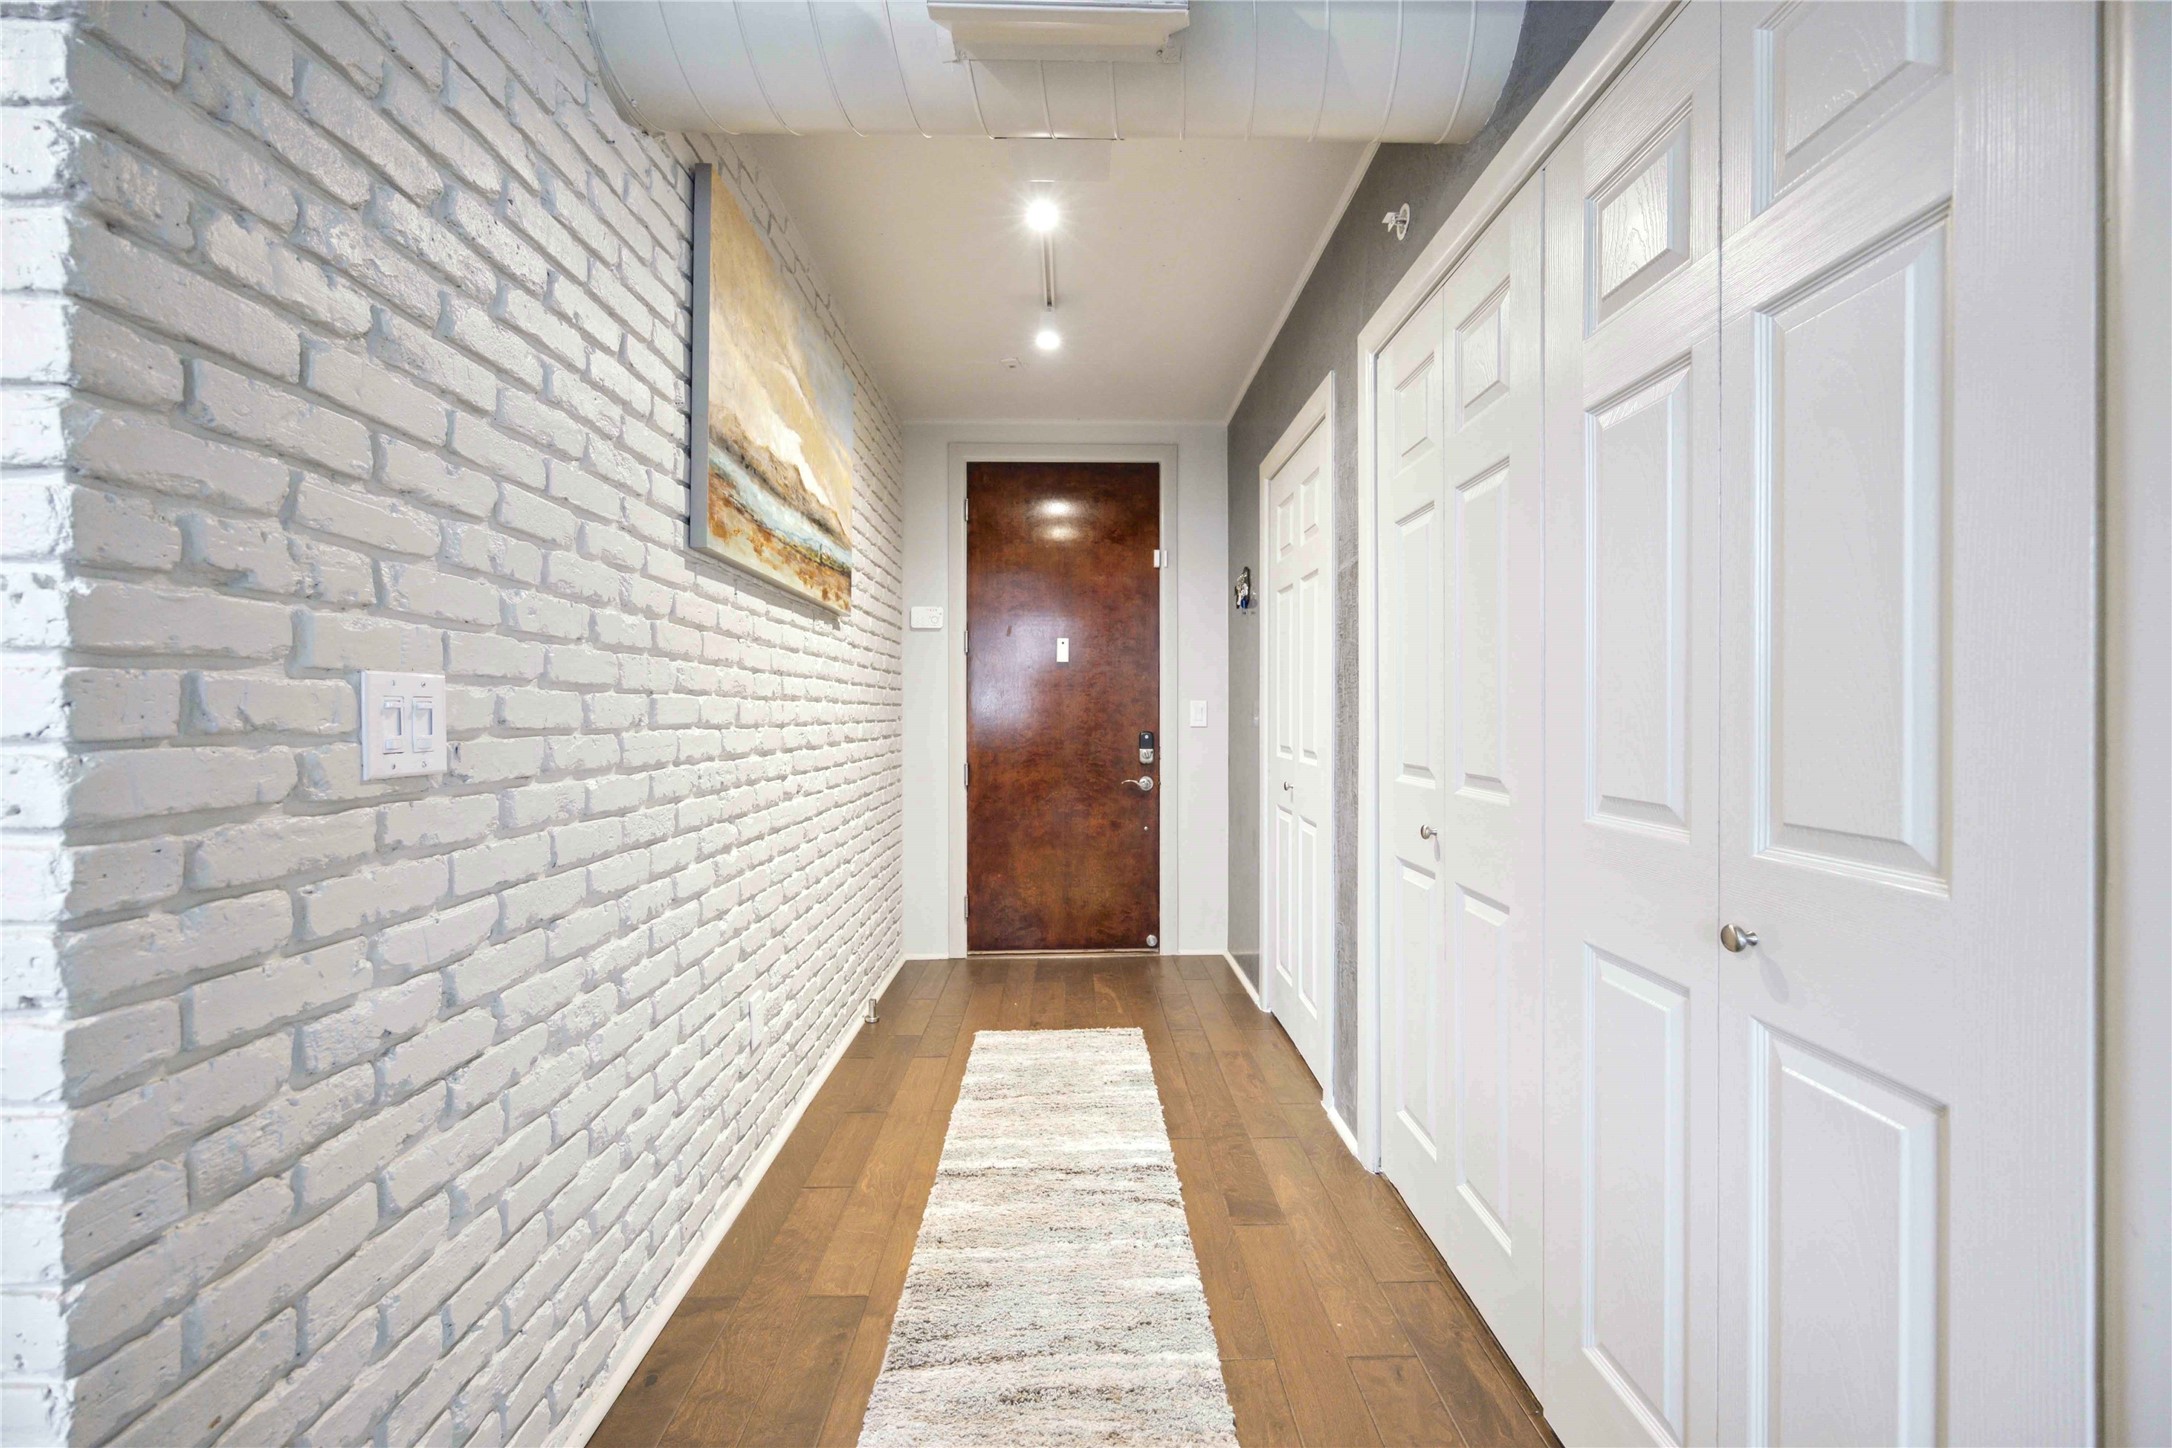 Warm entrance with painted brick